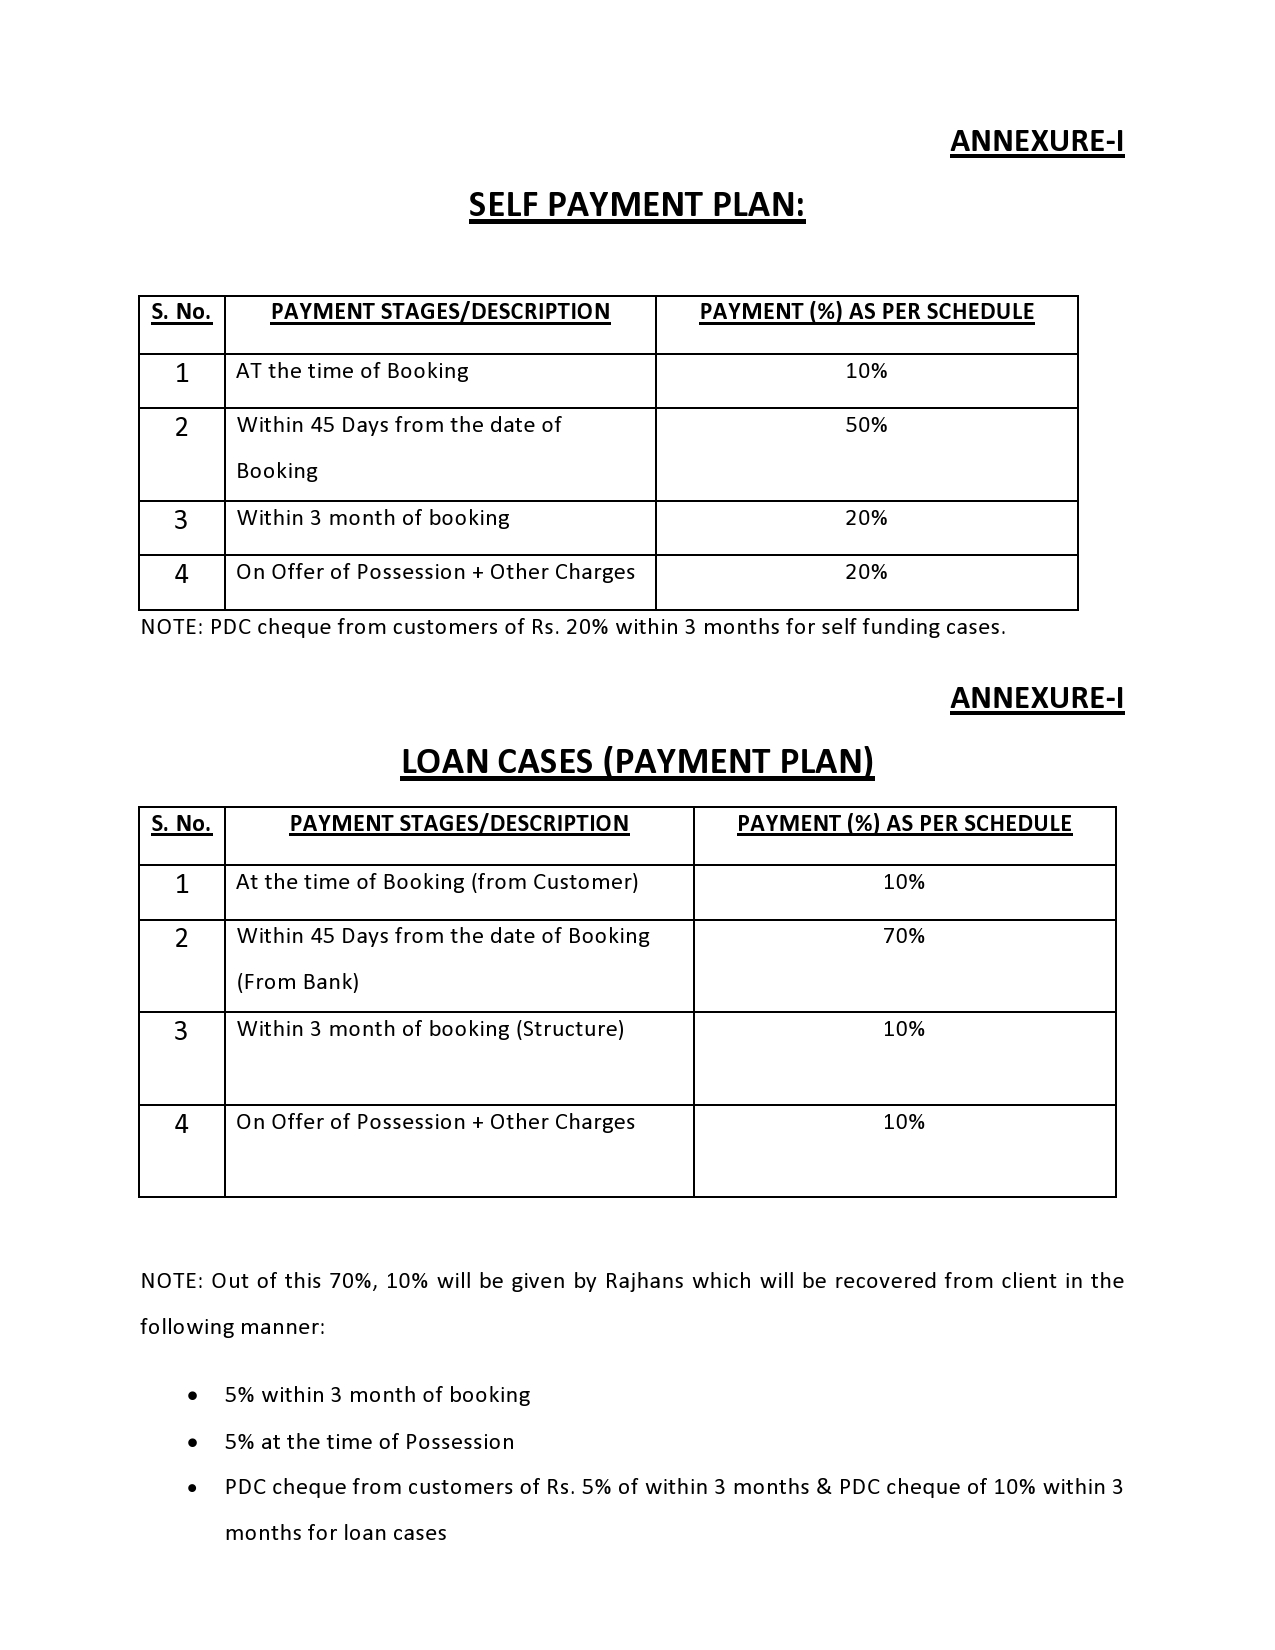 MjAyMC0wMy0xOCAwODoxOToxNQ==_Rajhans-Payment-plan-for-the-month-of-March-page0001.jpg